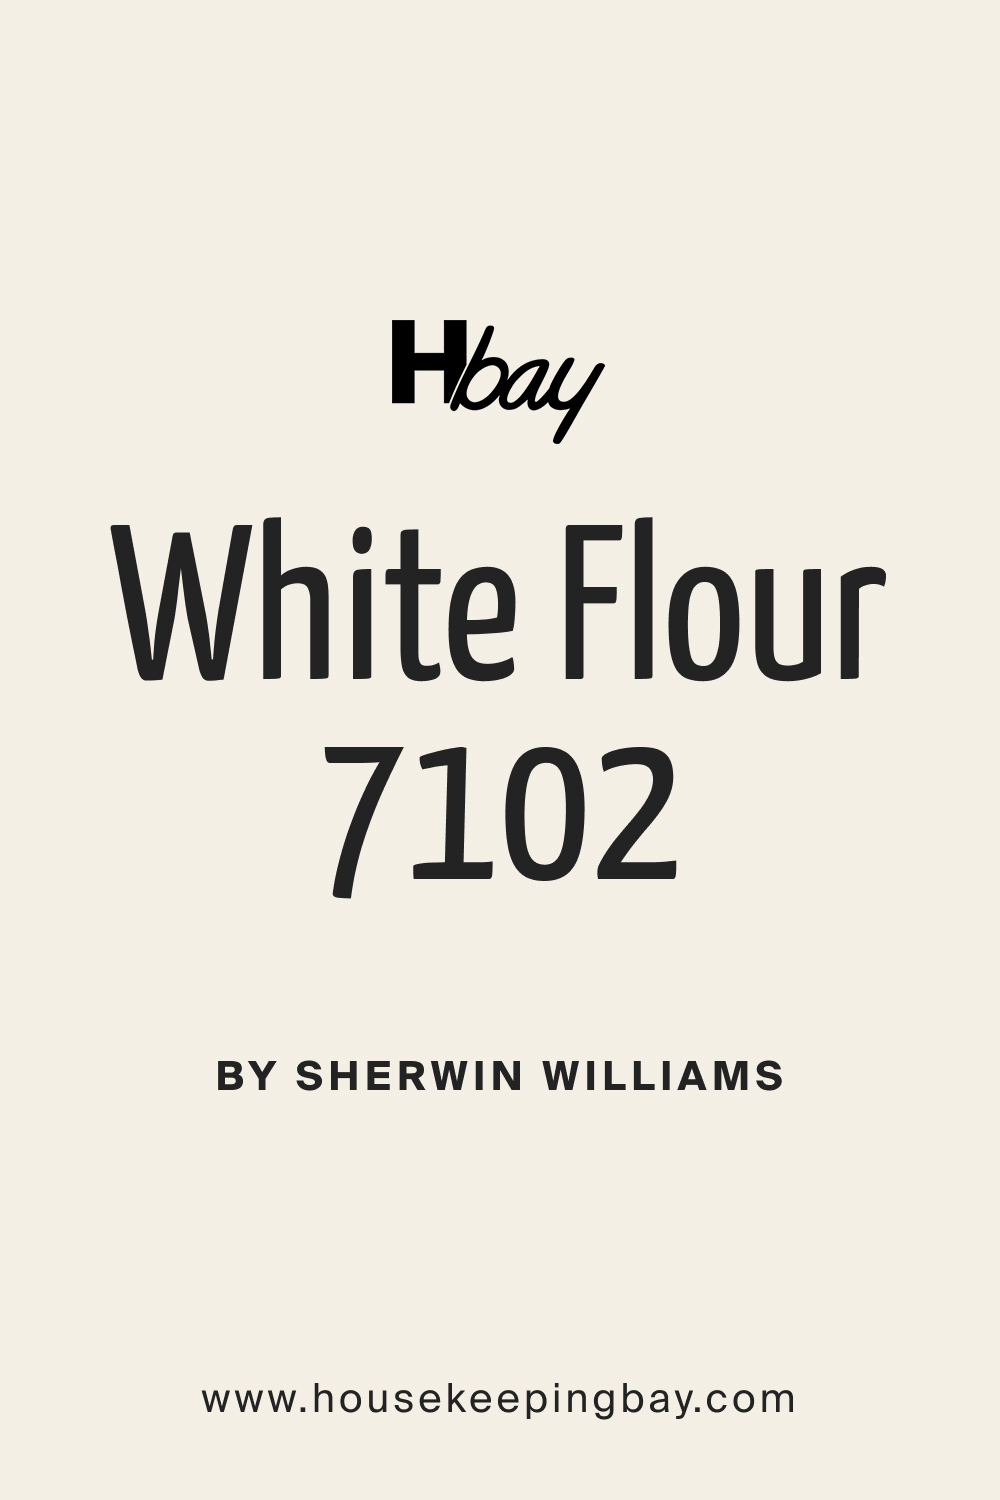 SW 7102 White Flour Paint Color by Sherwin Williams